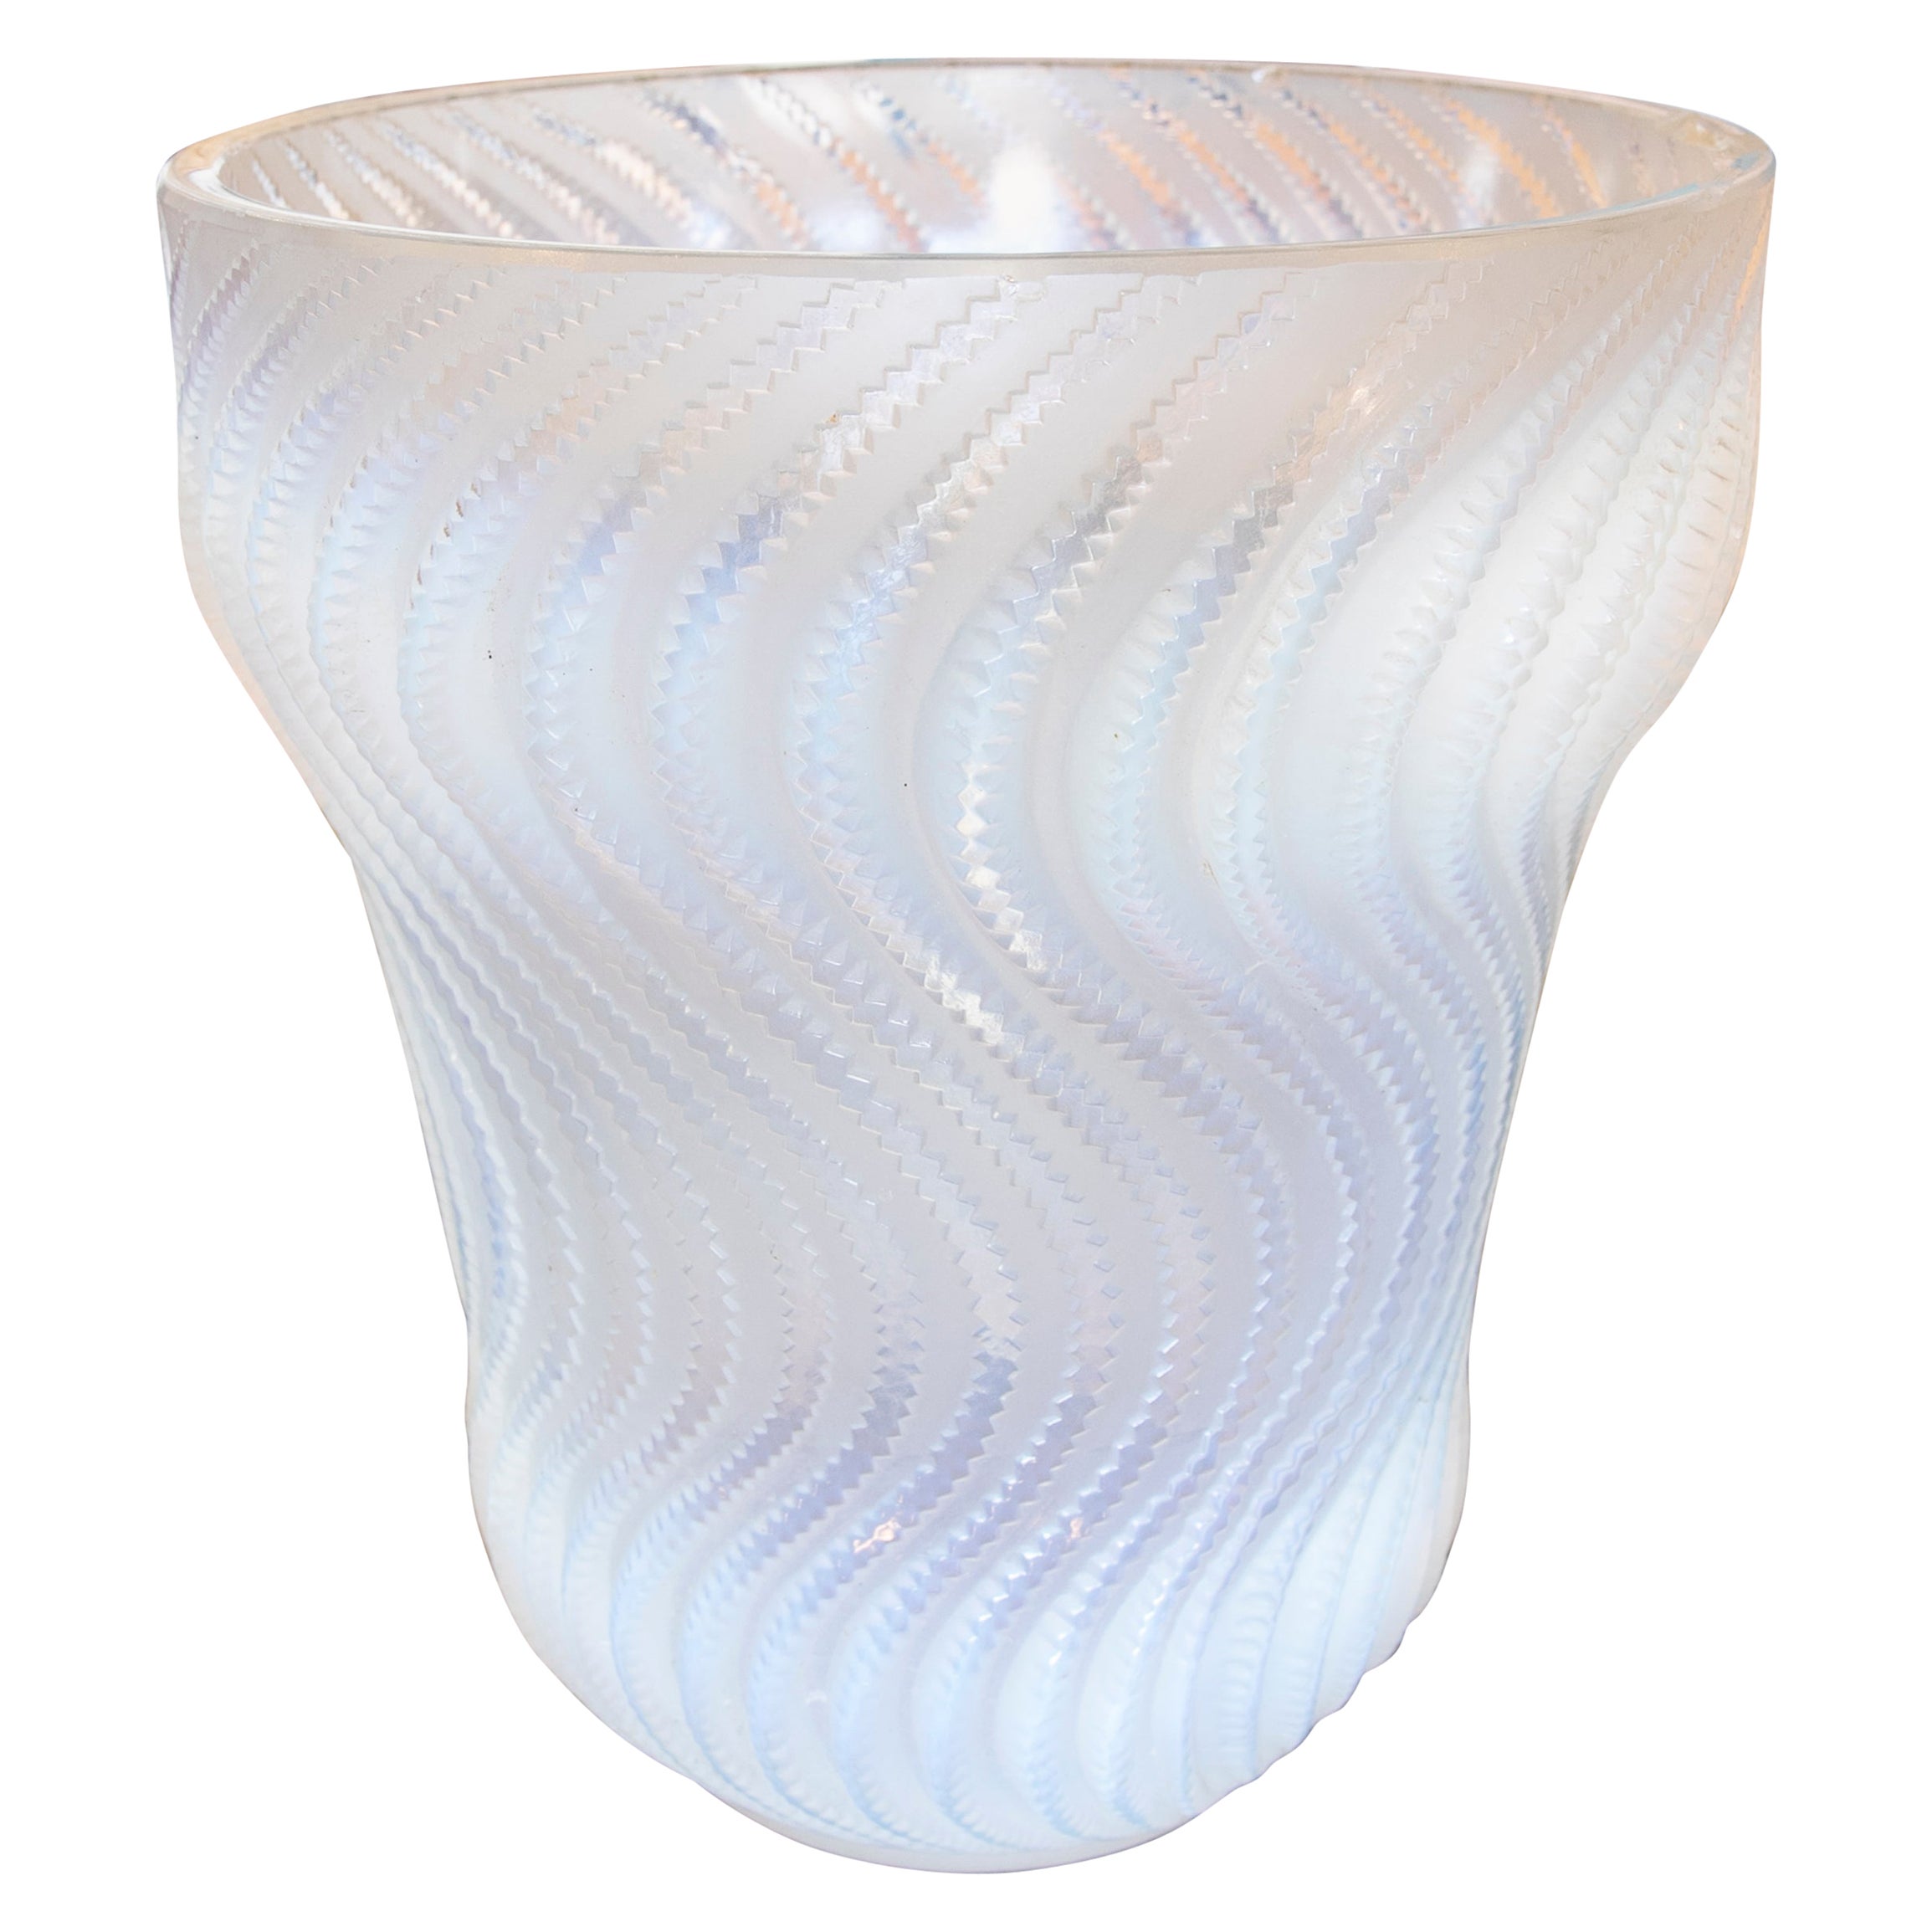 1980s, German, Glass Vase with Opaque and Translucent Tones For Sale